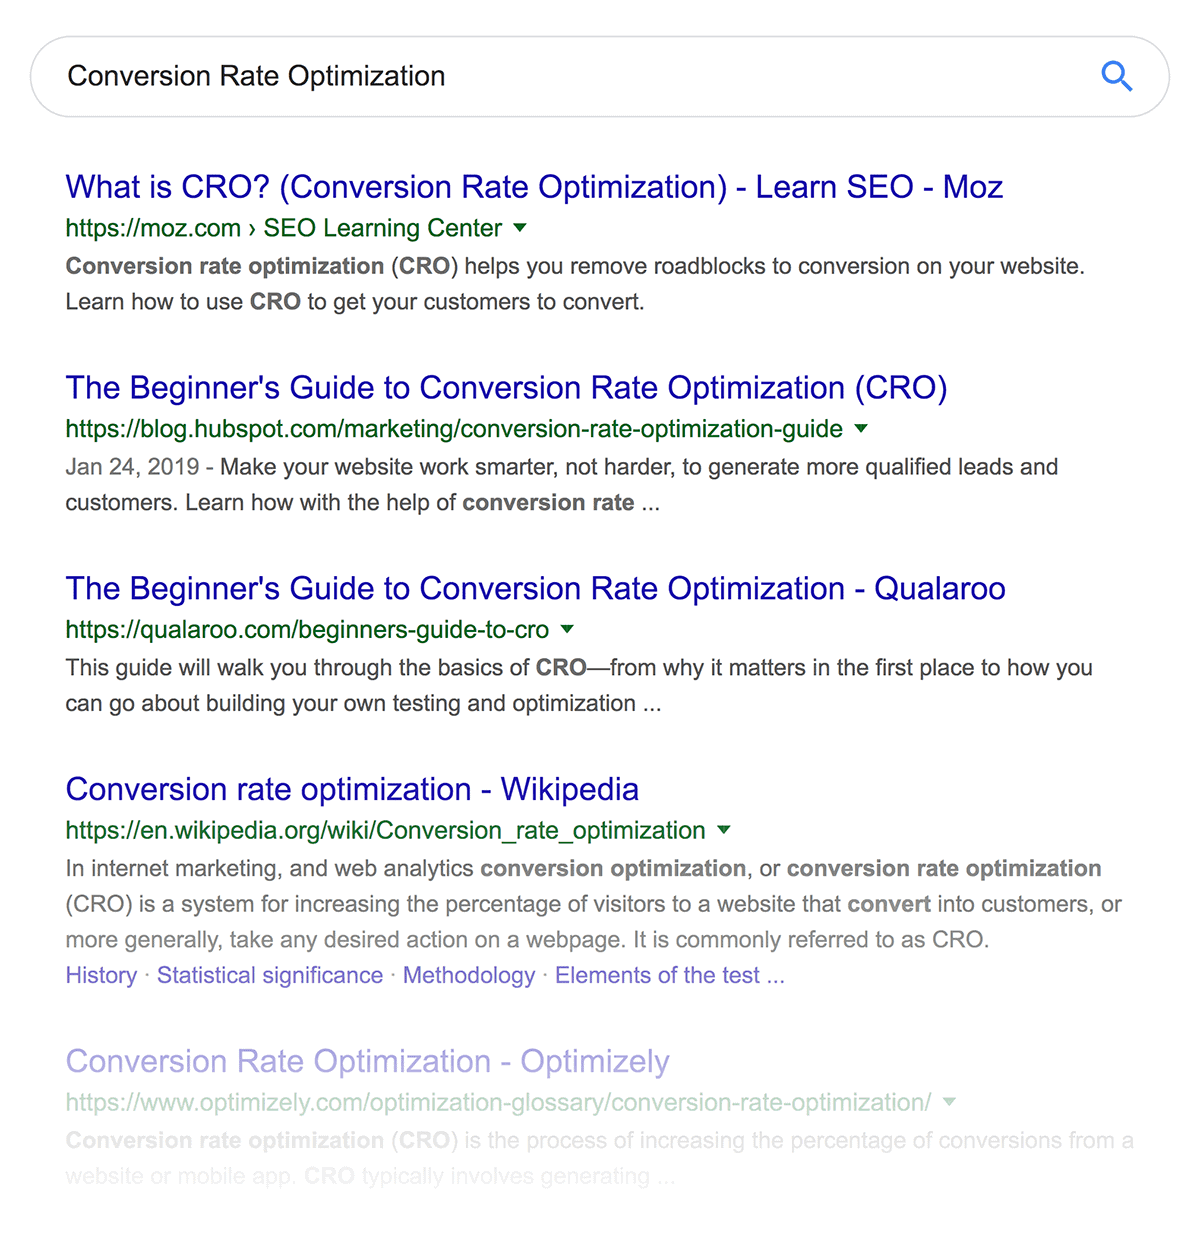 "Conversion Rate Optimization" search results